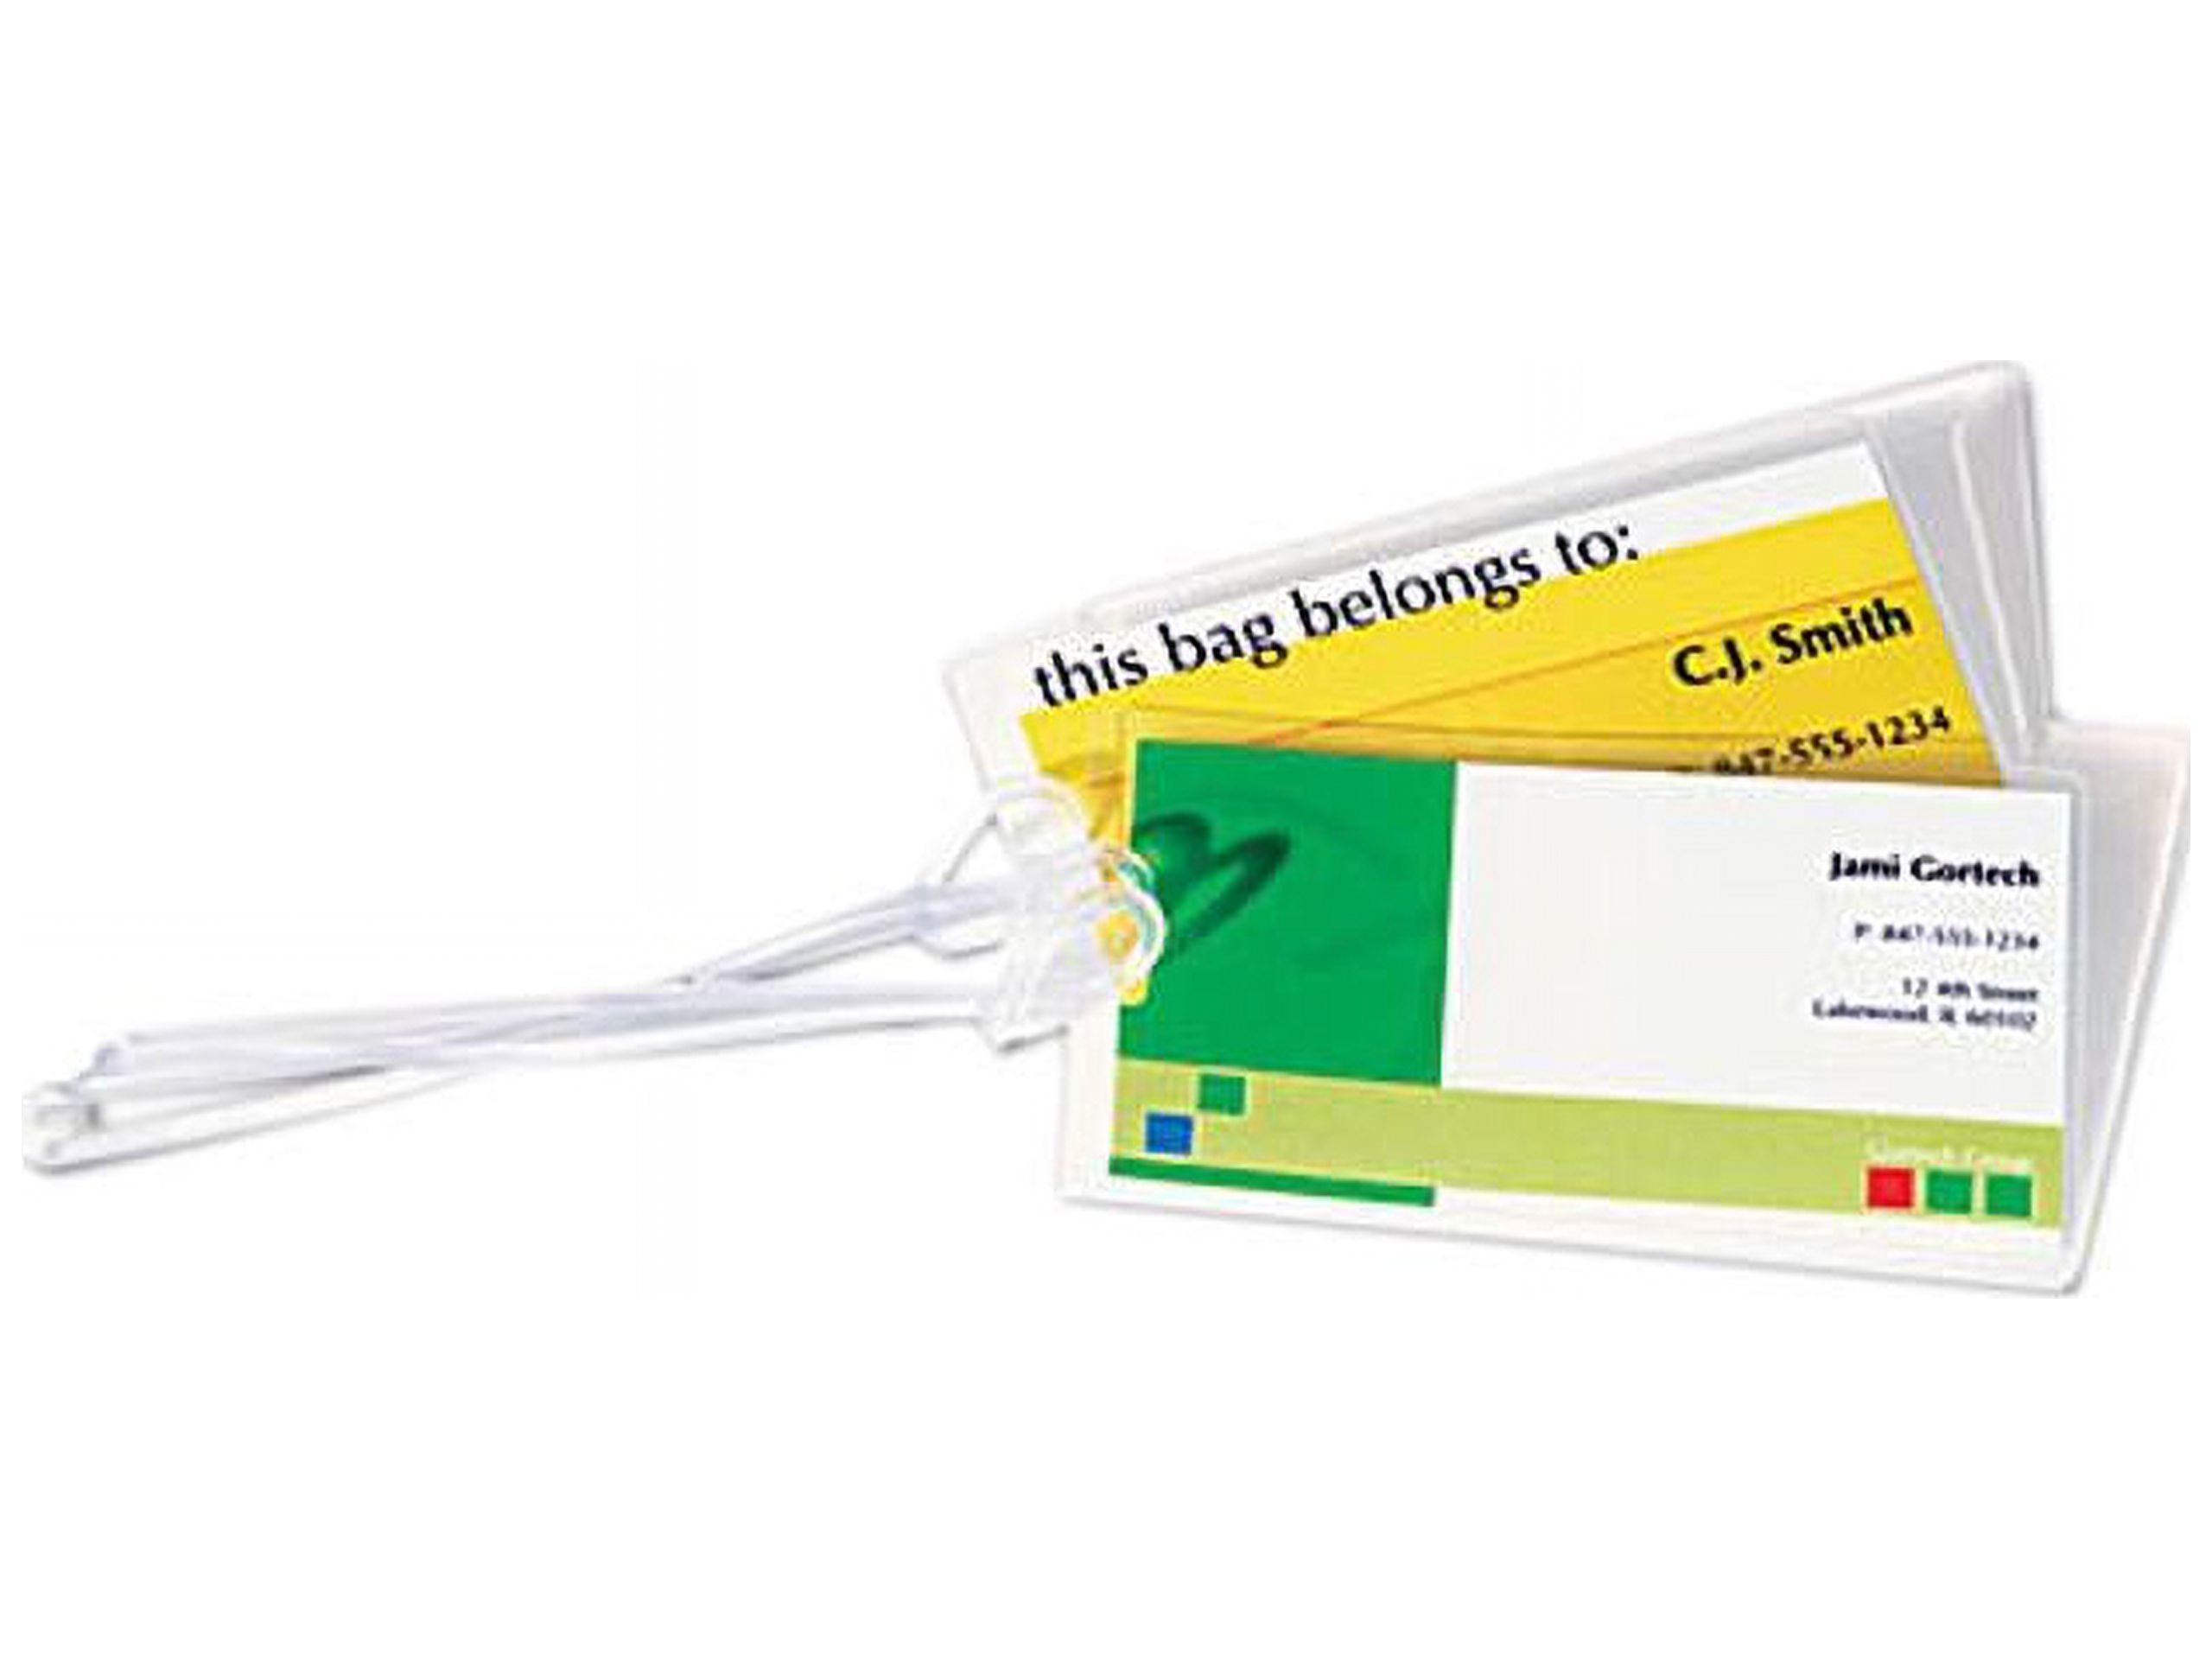 52034 Fellowes Laminating Pouches, 5 mil, 4 1/4 x 2 1/2, Tag Size, 50/Pack - image 1 of 5